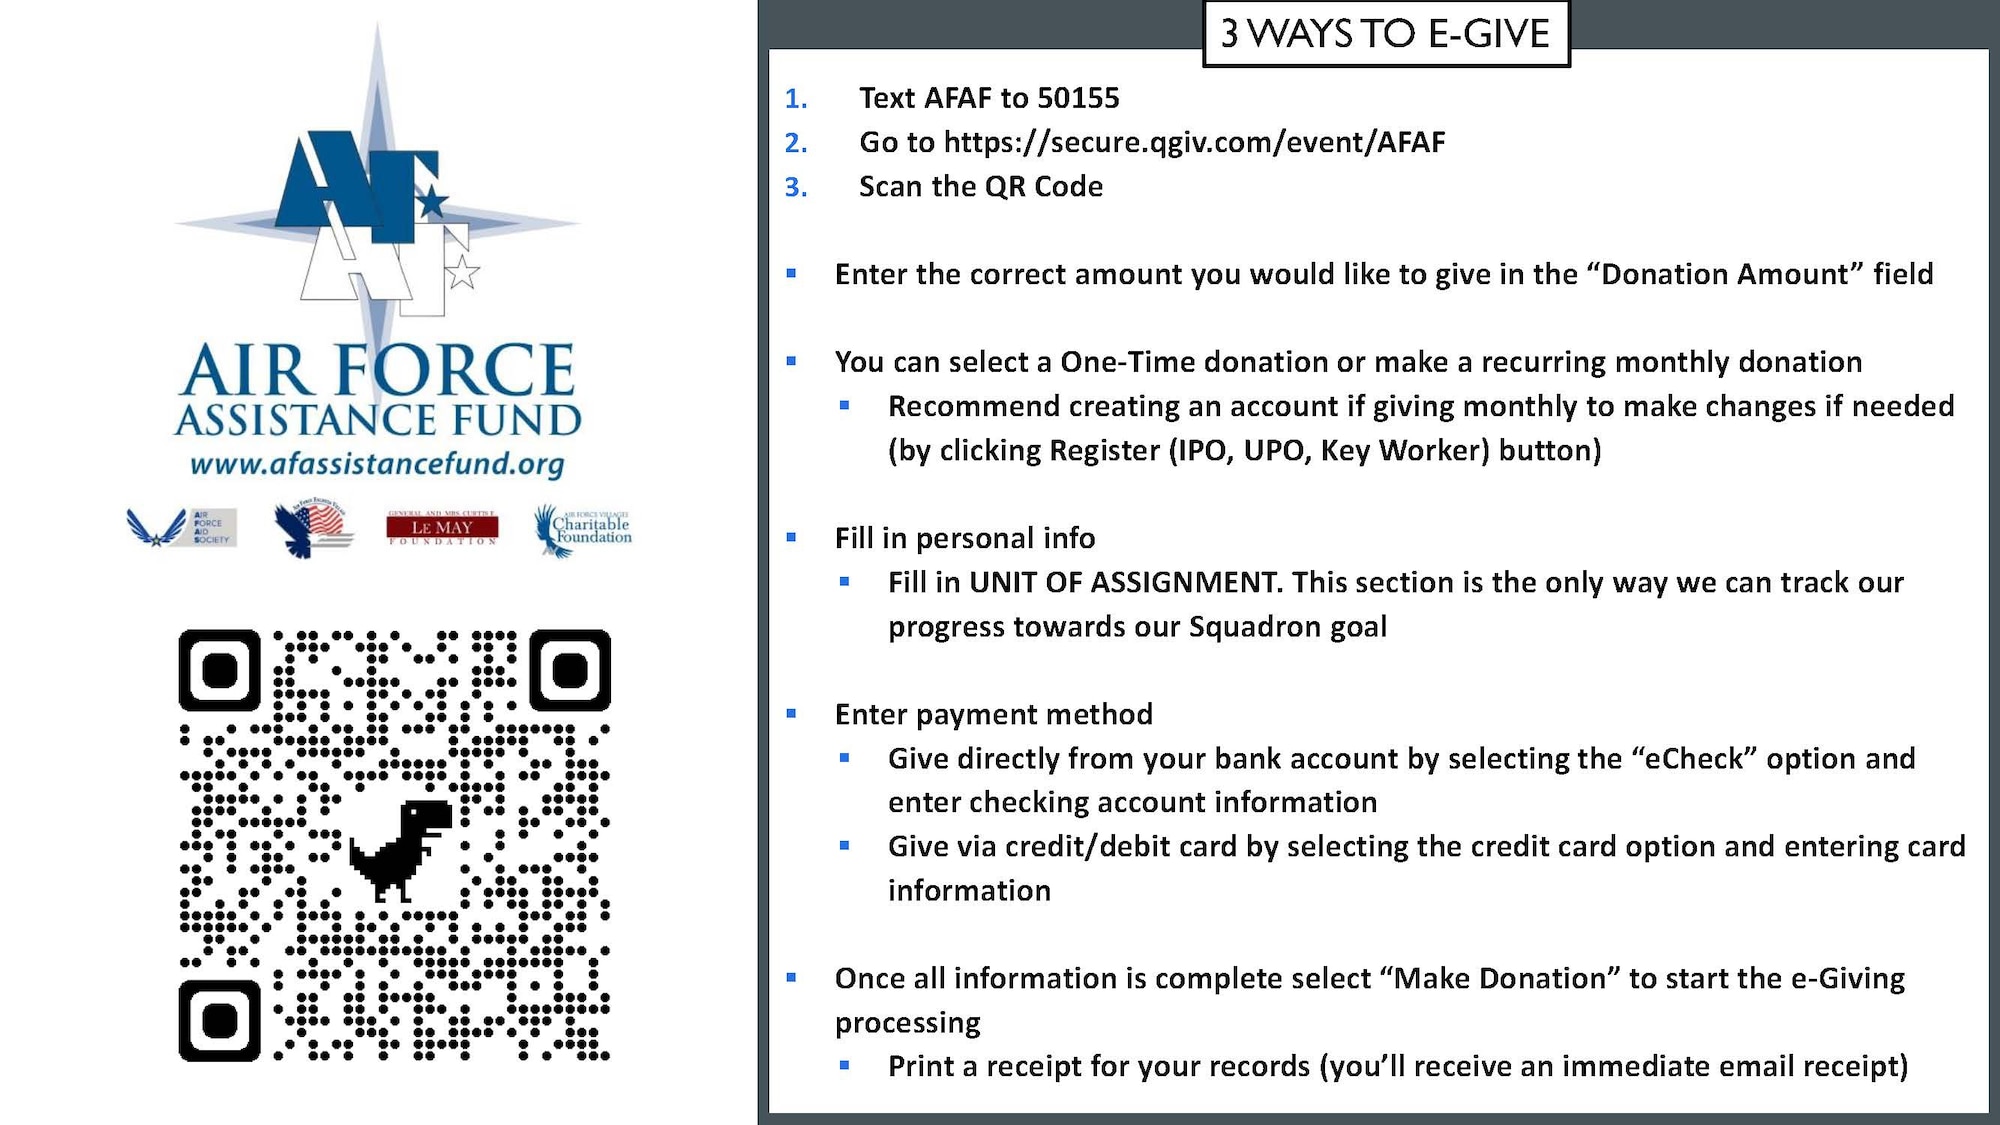 The Air Force Assistance Fund began at McChord Field March 15 and will last through April 23. Currently, there are three ways to donate. The first and preferred method is through e-giving. To donate electronically, donors can text “AFAF” to 50155 or visit https://secure.qgiv.com/event/afaf/team/873061/. People can also donate by payroll deduction plans and through cash or check. (Courtesy Graphic)